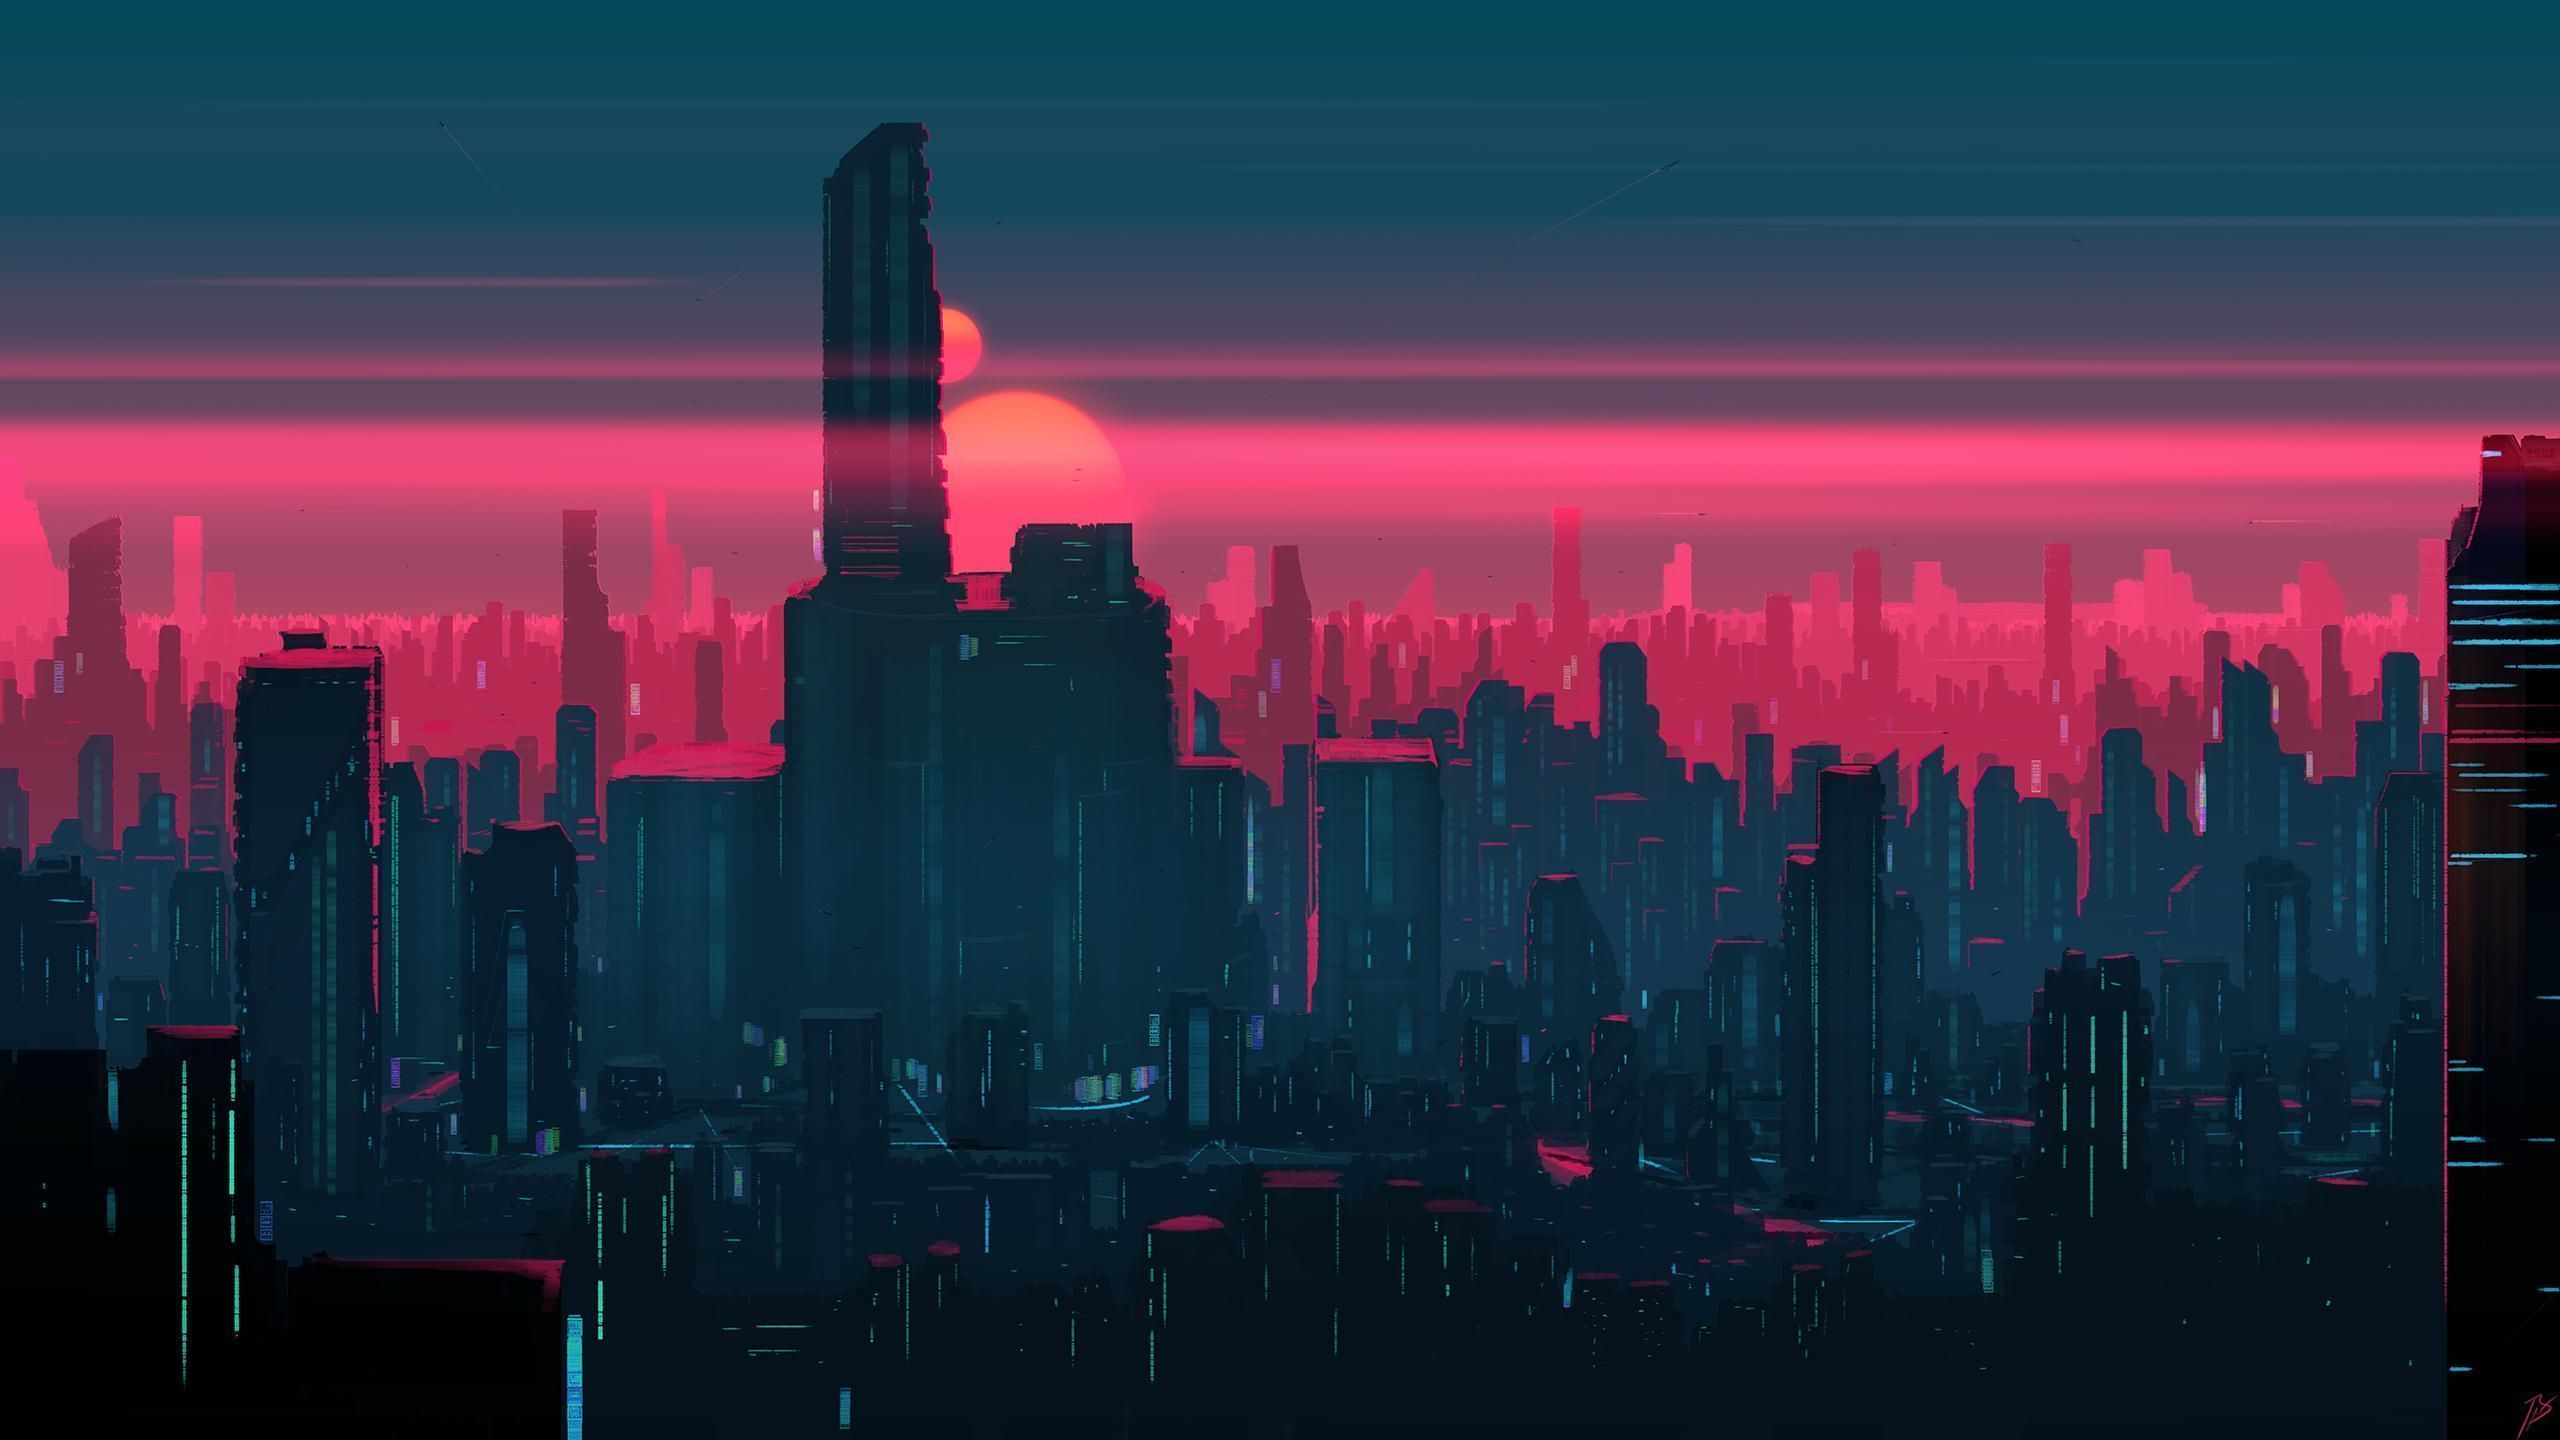 A futuristic city with buildings and skyscrapers - 2560x1440